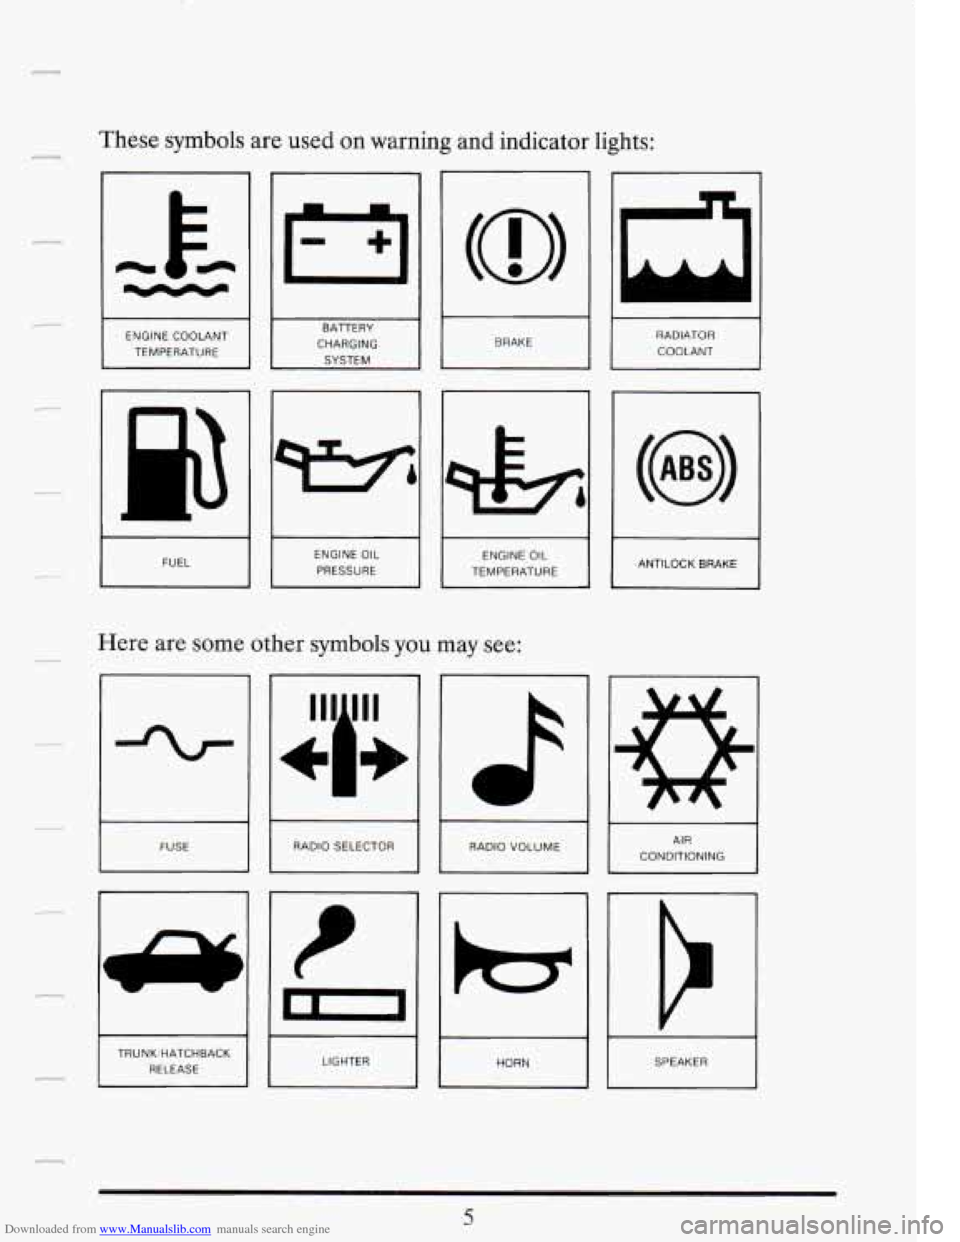 CADILLAC FLEETWOOD 1993 2.G User Guide Downloaded from www.Manualslib.com manuals search engine These symbols  are used  on  warning  and  indicator  lights: 
I- I 
I I BRAKE I 
ENGINE  COOLANT 
TEMPERATURE I 
RADIATOR COOLANT 
CHARGING 
I